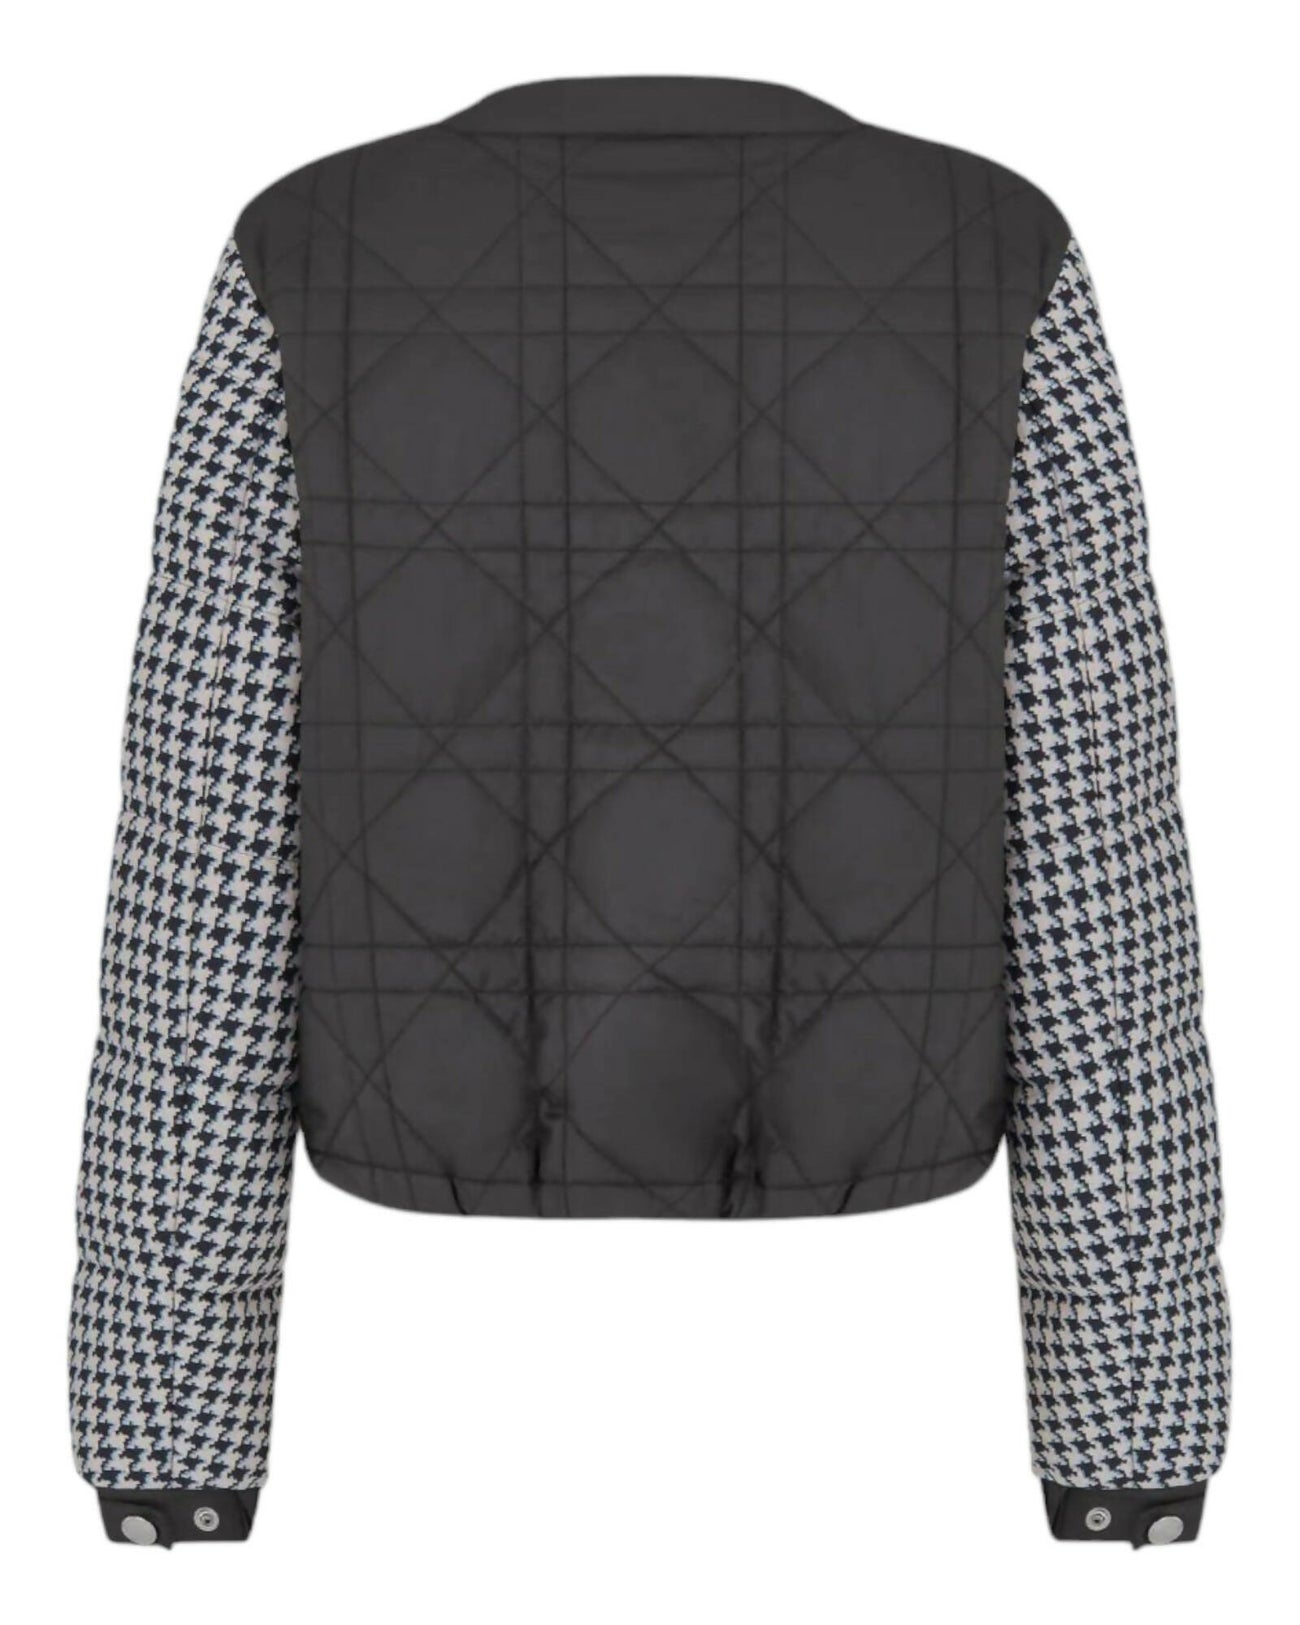 Christian Dior, Houndstooth Virgin Wool and Silk Quilted Jacket